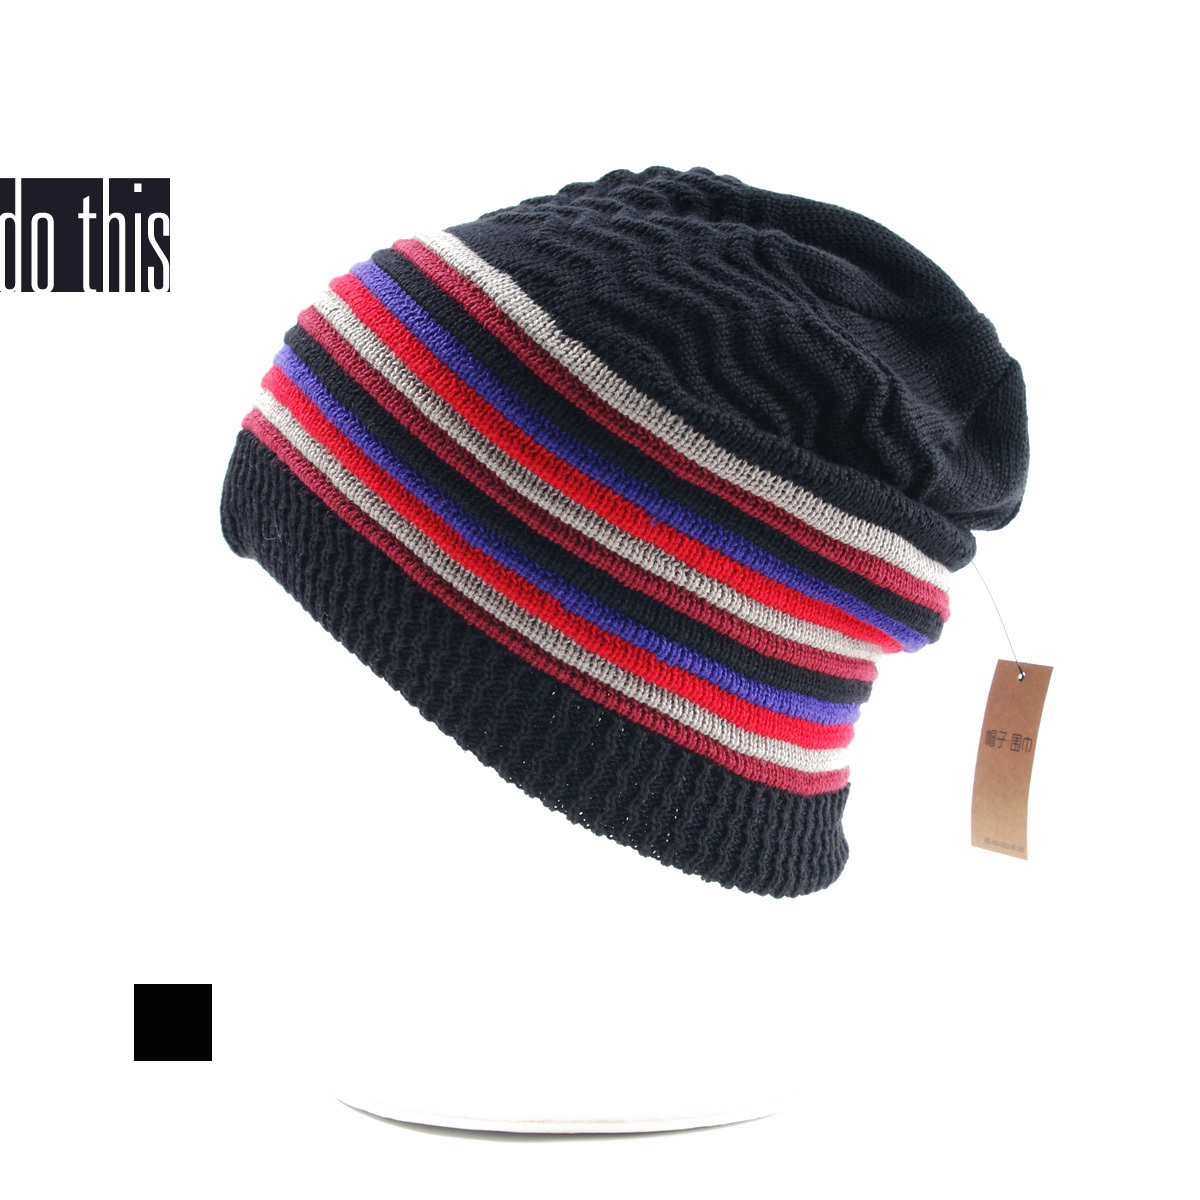 Dothis autumn and winter gray red blue color all-match knitted hat skiing hat 1m2091